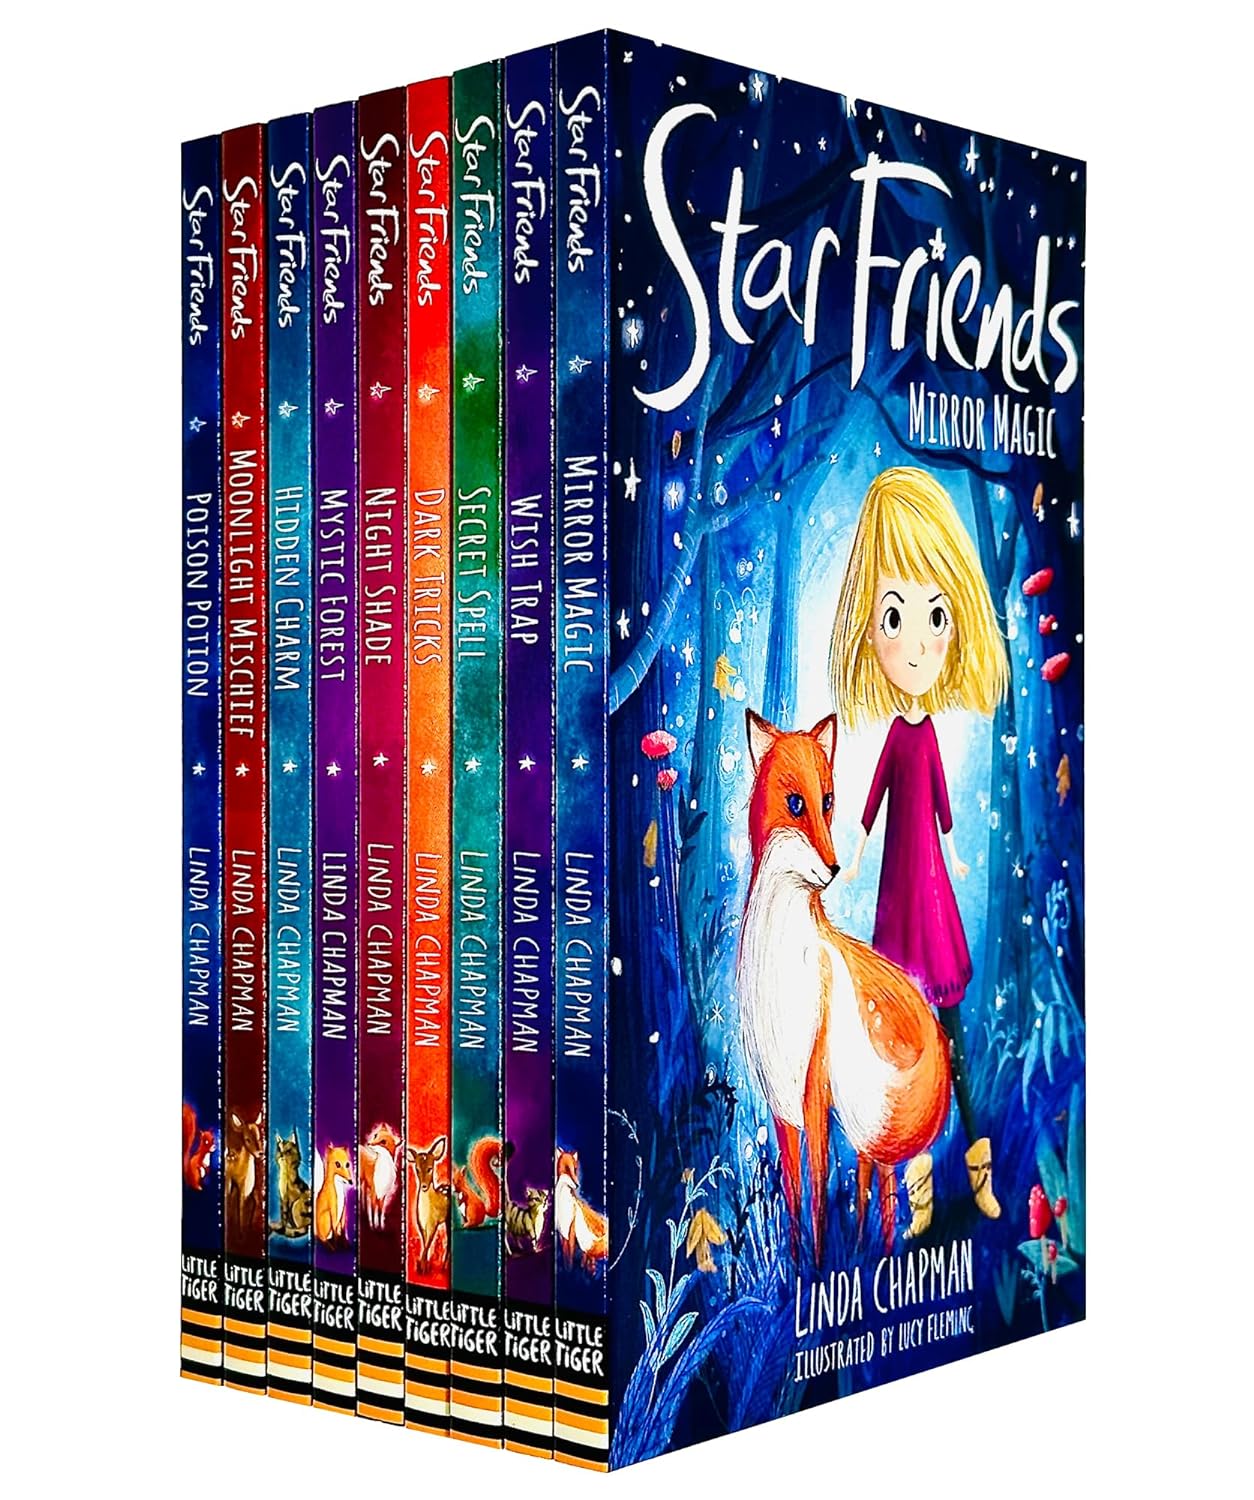 Star Friends Series by Linda Chapman 9 Books Collection Set - Age 7-10 - Paperback